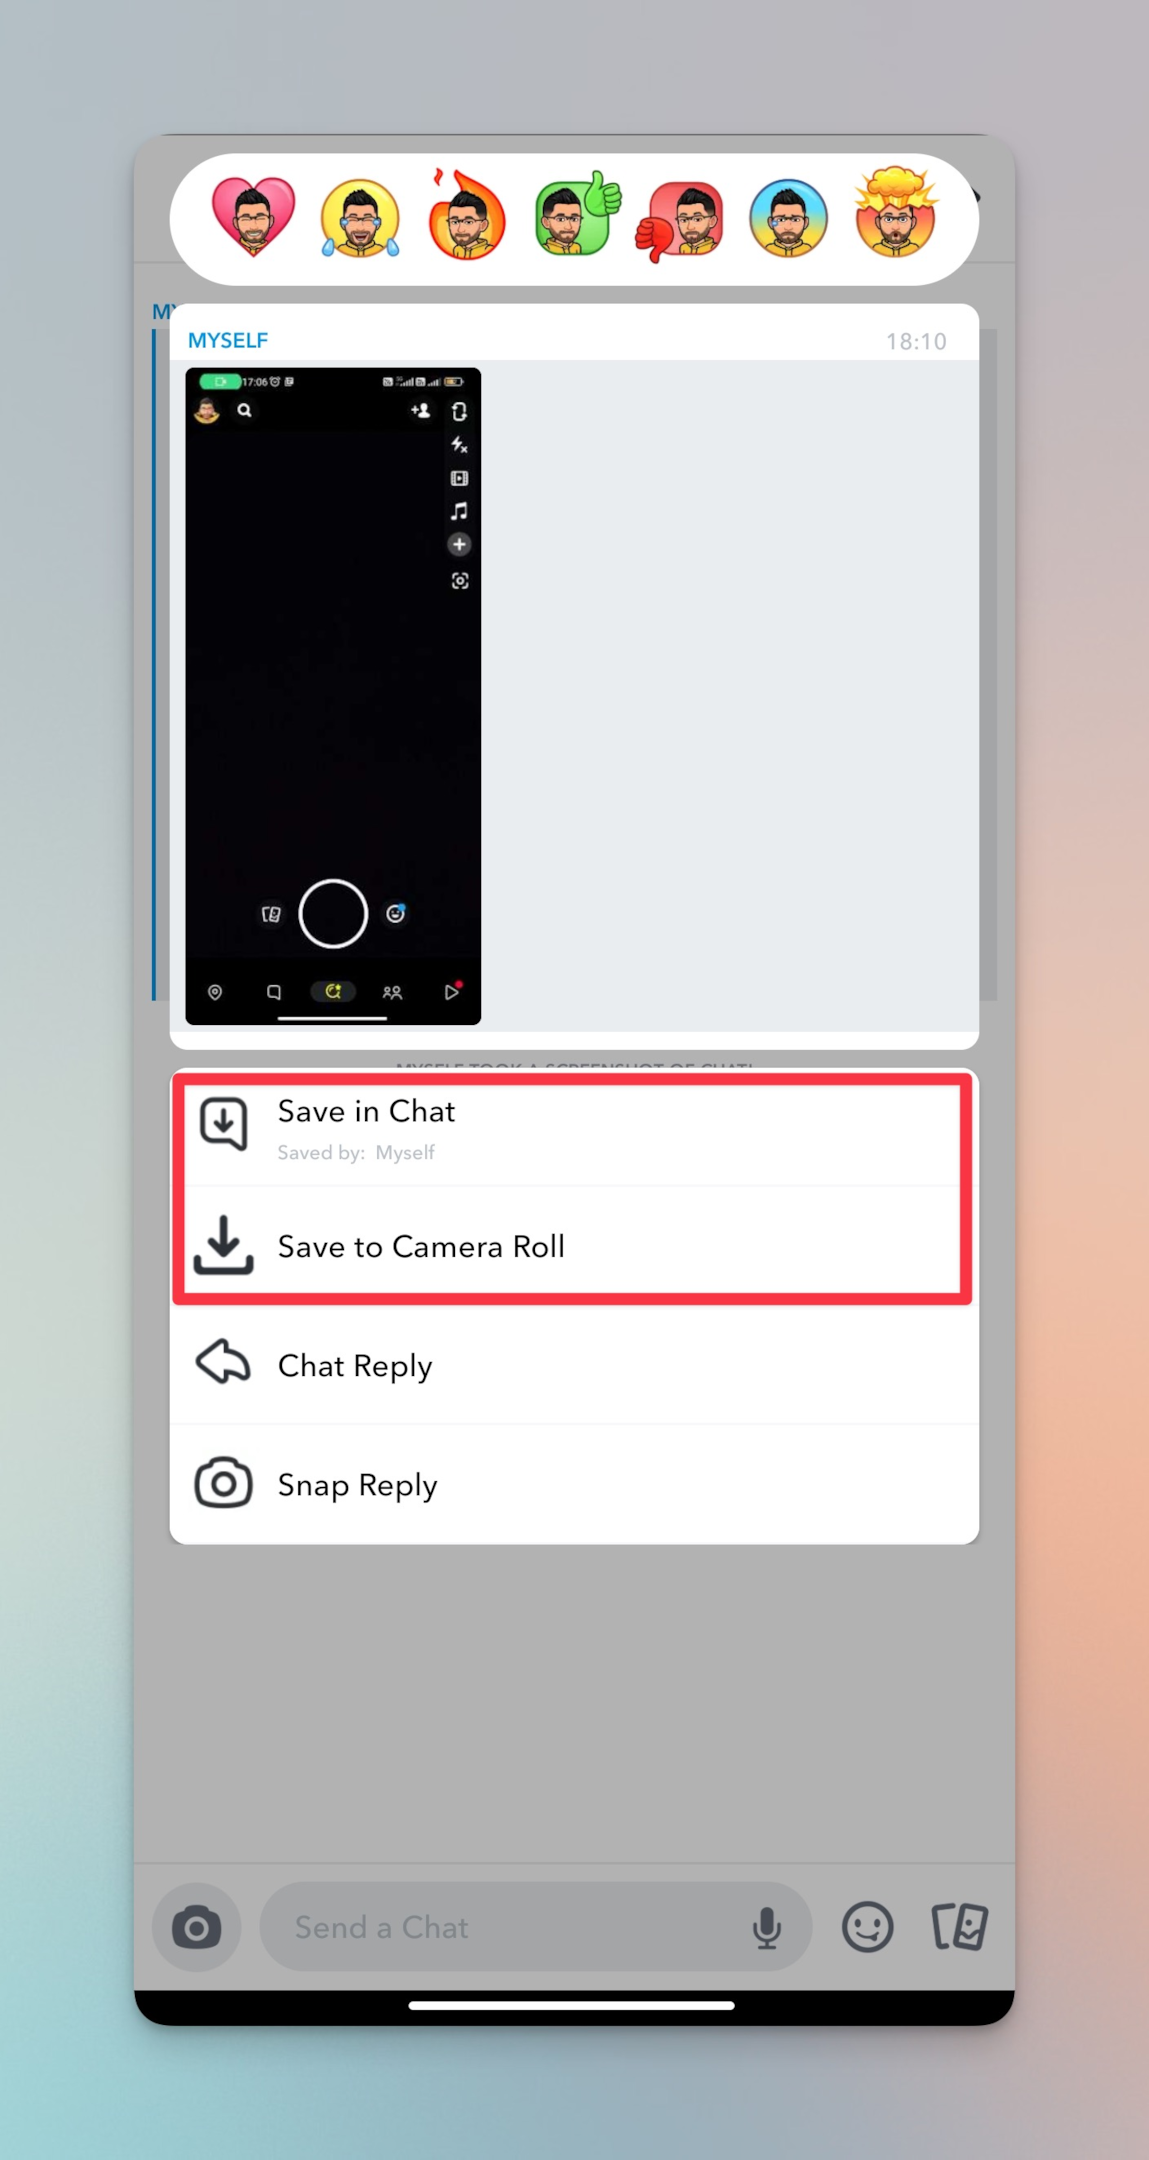 Remote.tools highlights option to save snaps. Keep in mind, you cannot recover deleted snaps